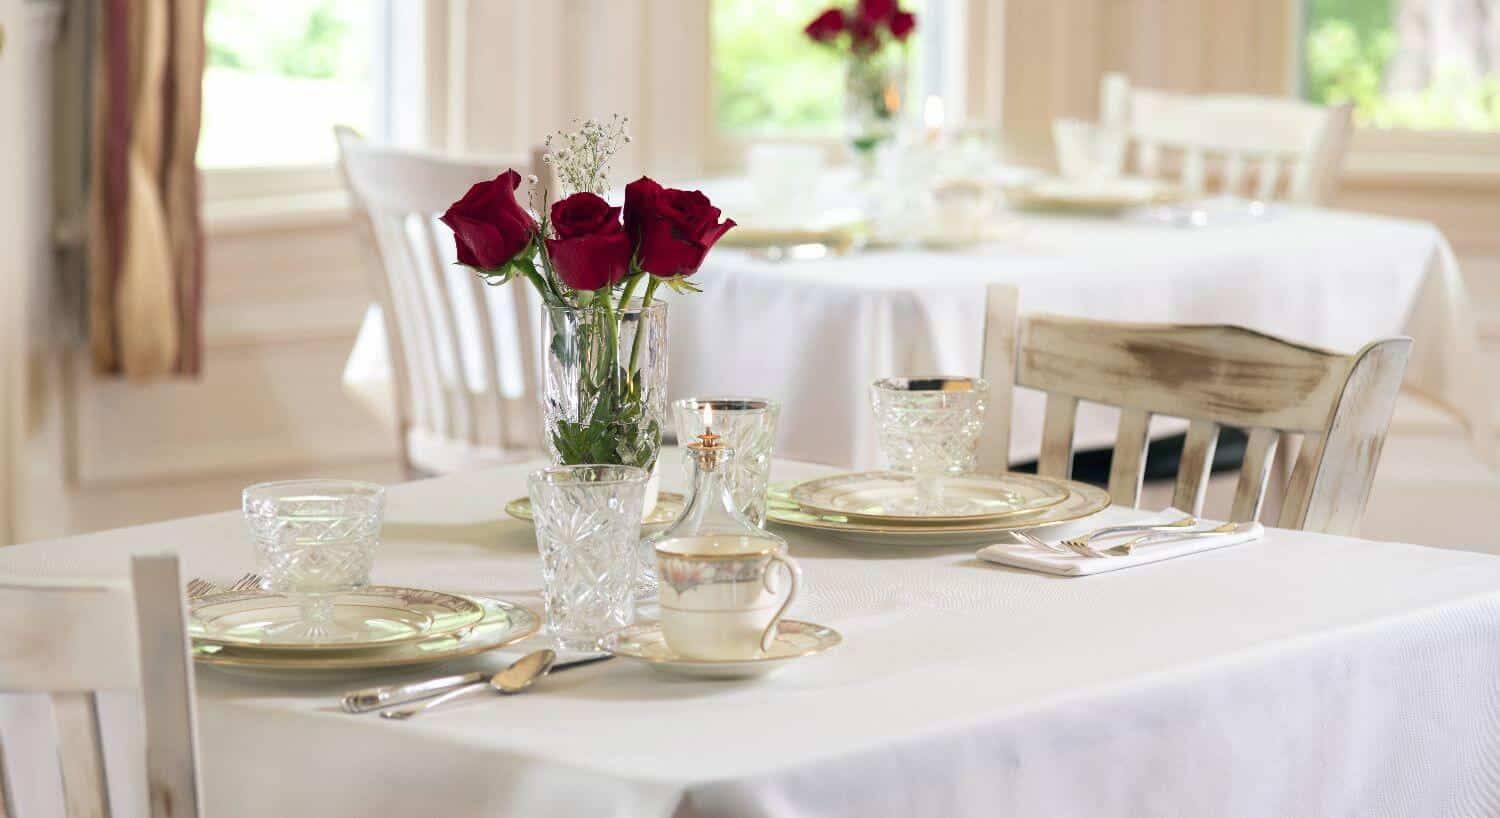 White covered dining tables set with white china and red roses.